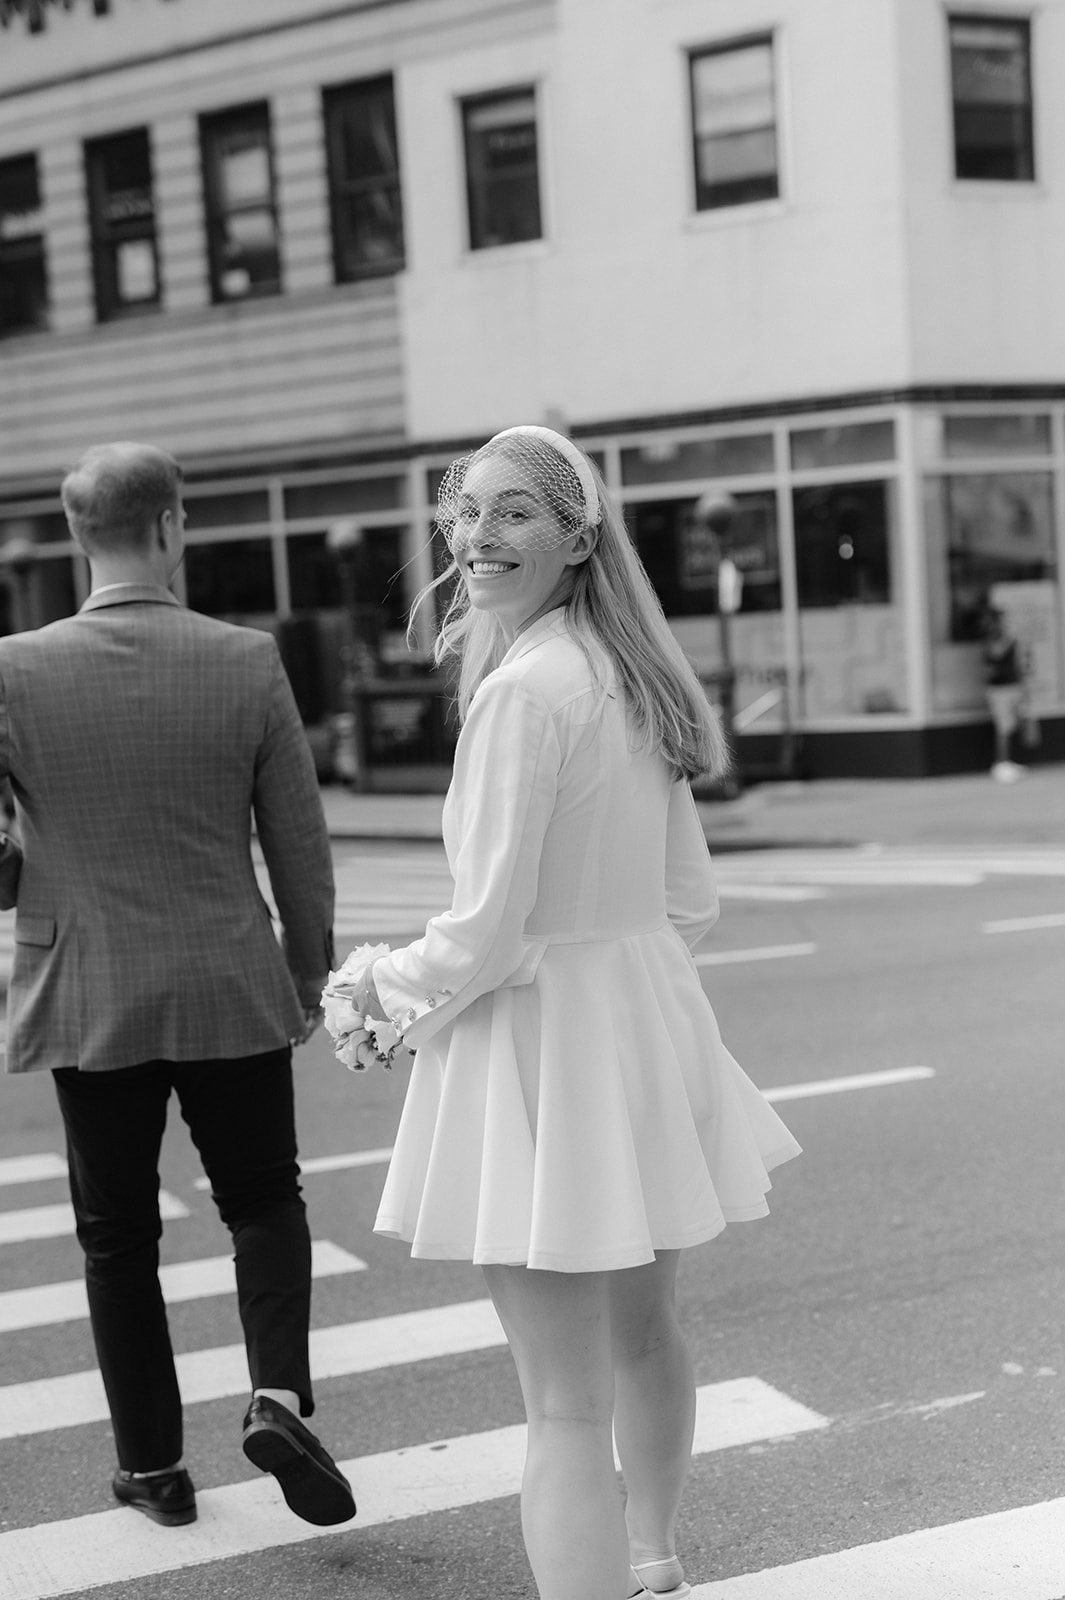 Bride and groom share a candid moment crossing a New York crosswalk, the bride's joyful smile adding charm to this urban love story.